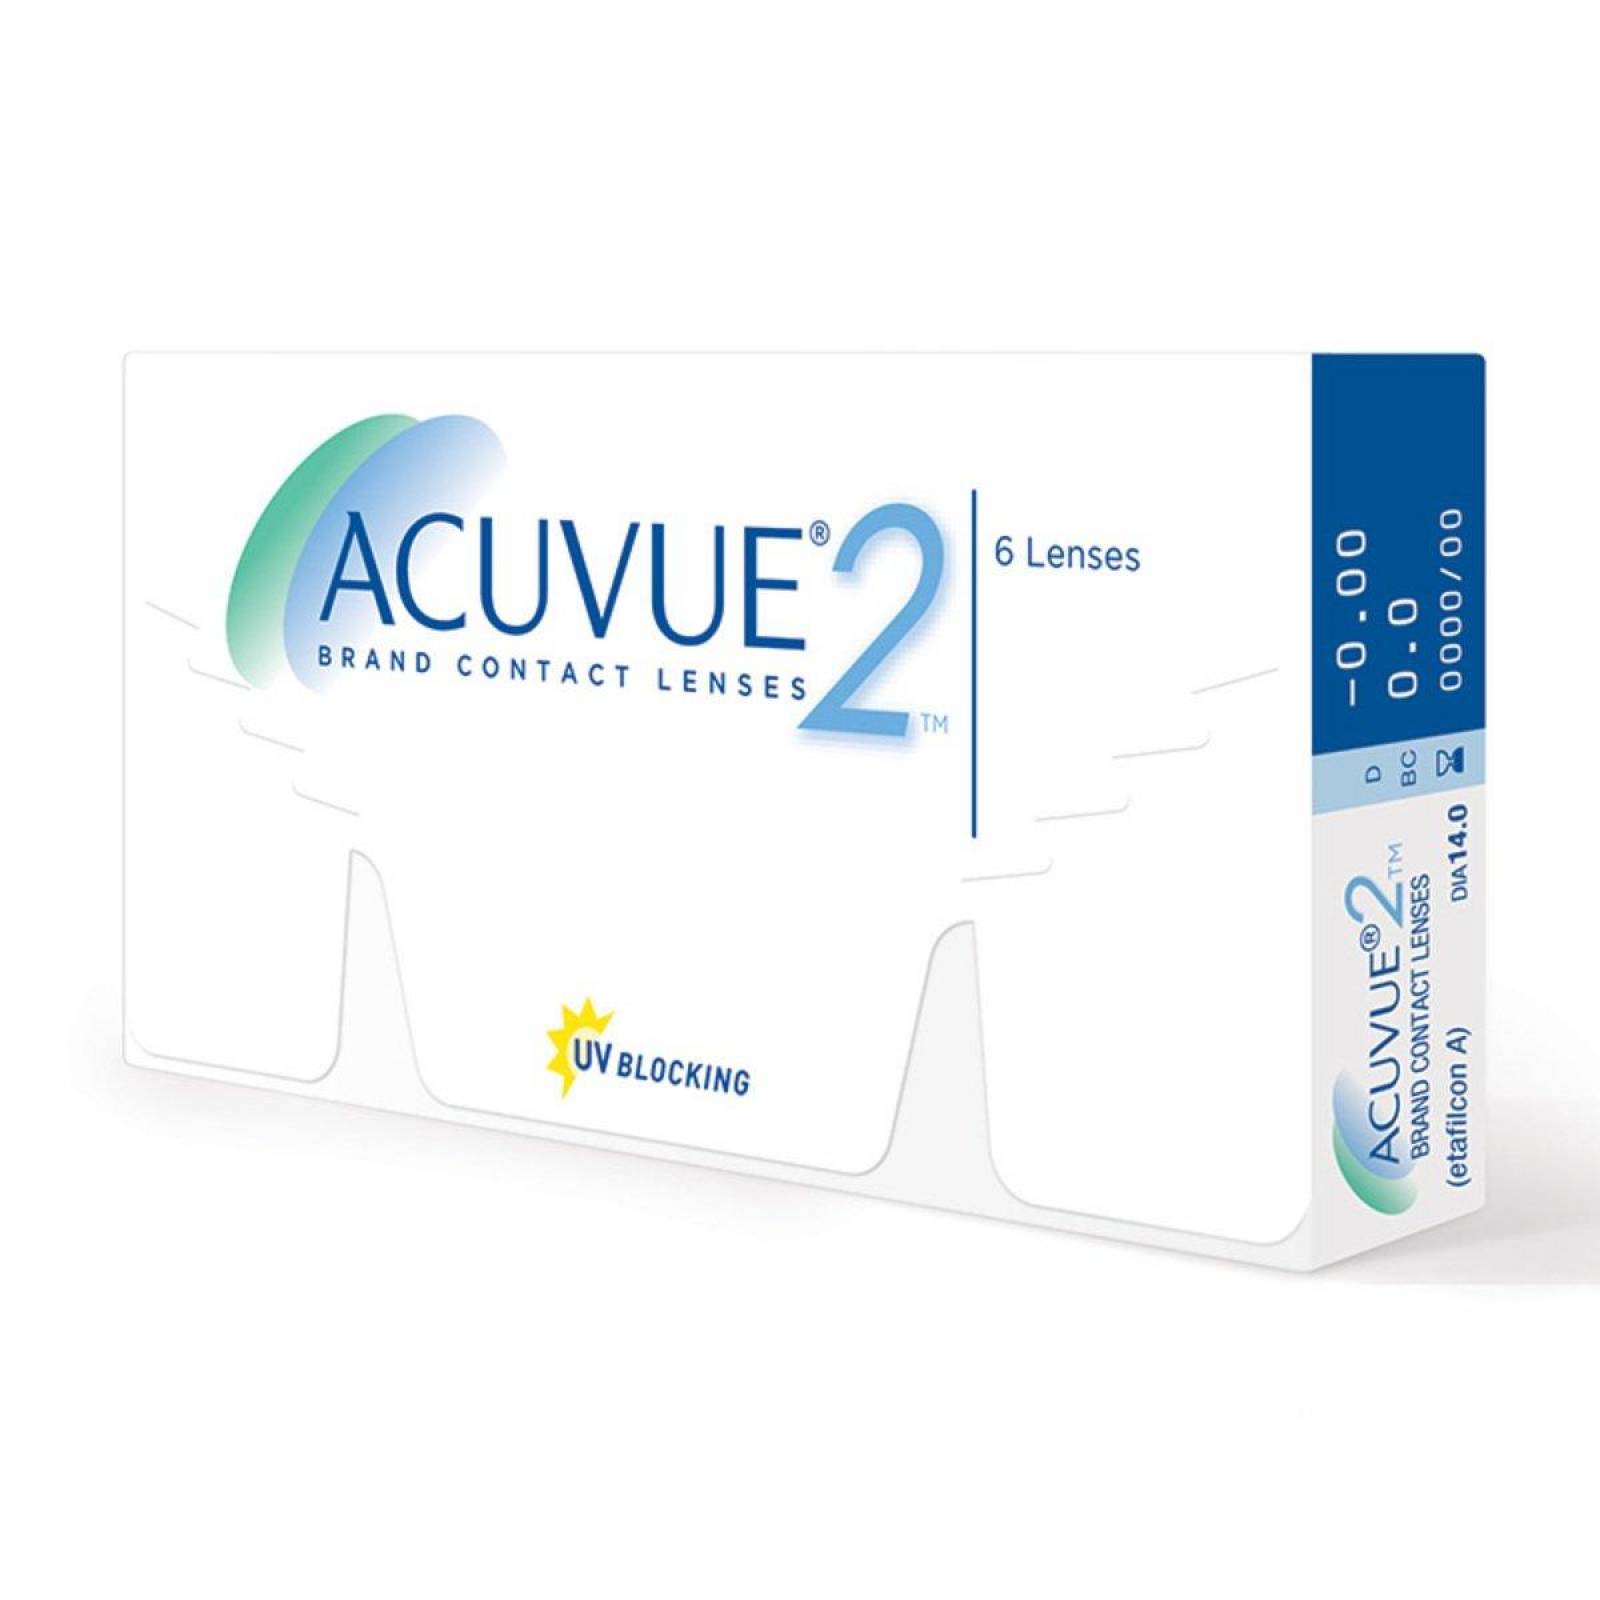 Acuvue 2 +2.75